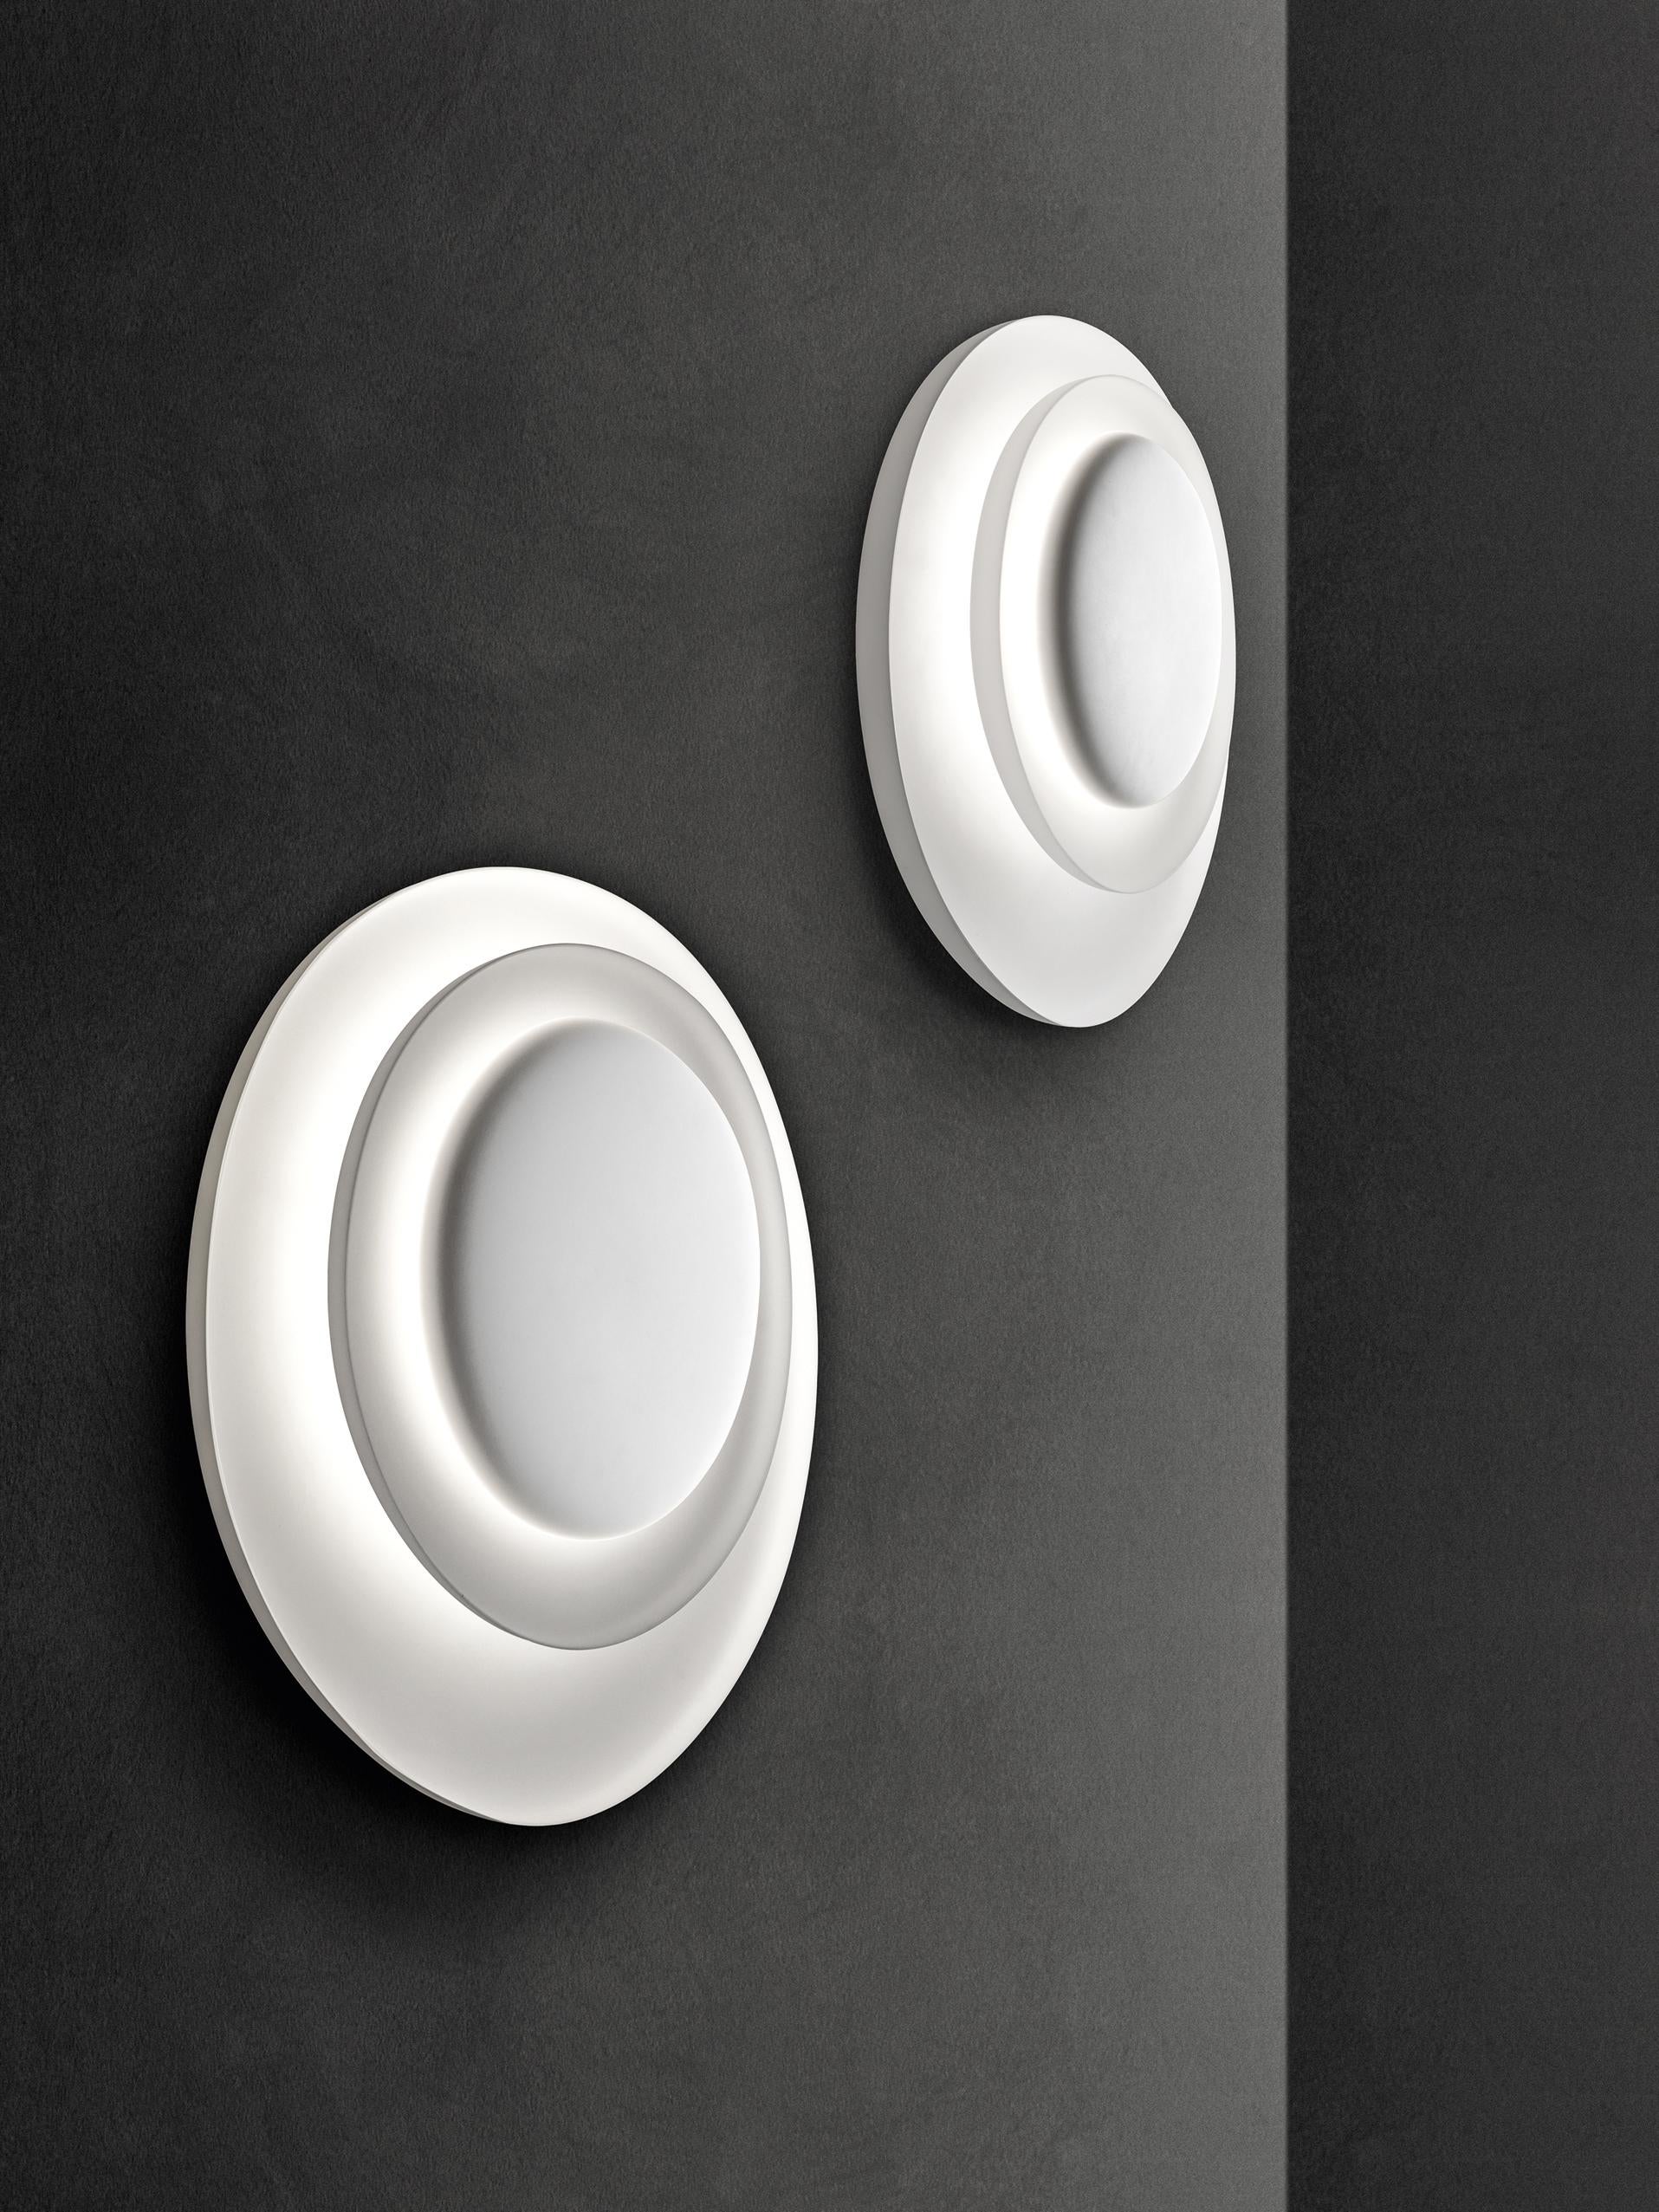 Wall lamp with reflected and diffused light. Consisting of three matte white injection molded polycarbonate egg-shaped plates and fitted together asymmetrically. The largest plate works as the wall mounting plate, and the two central plates conceal